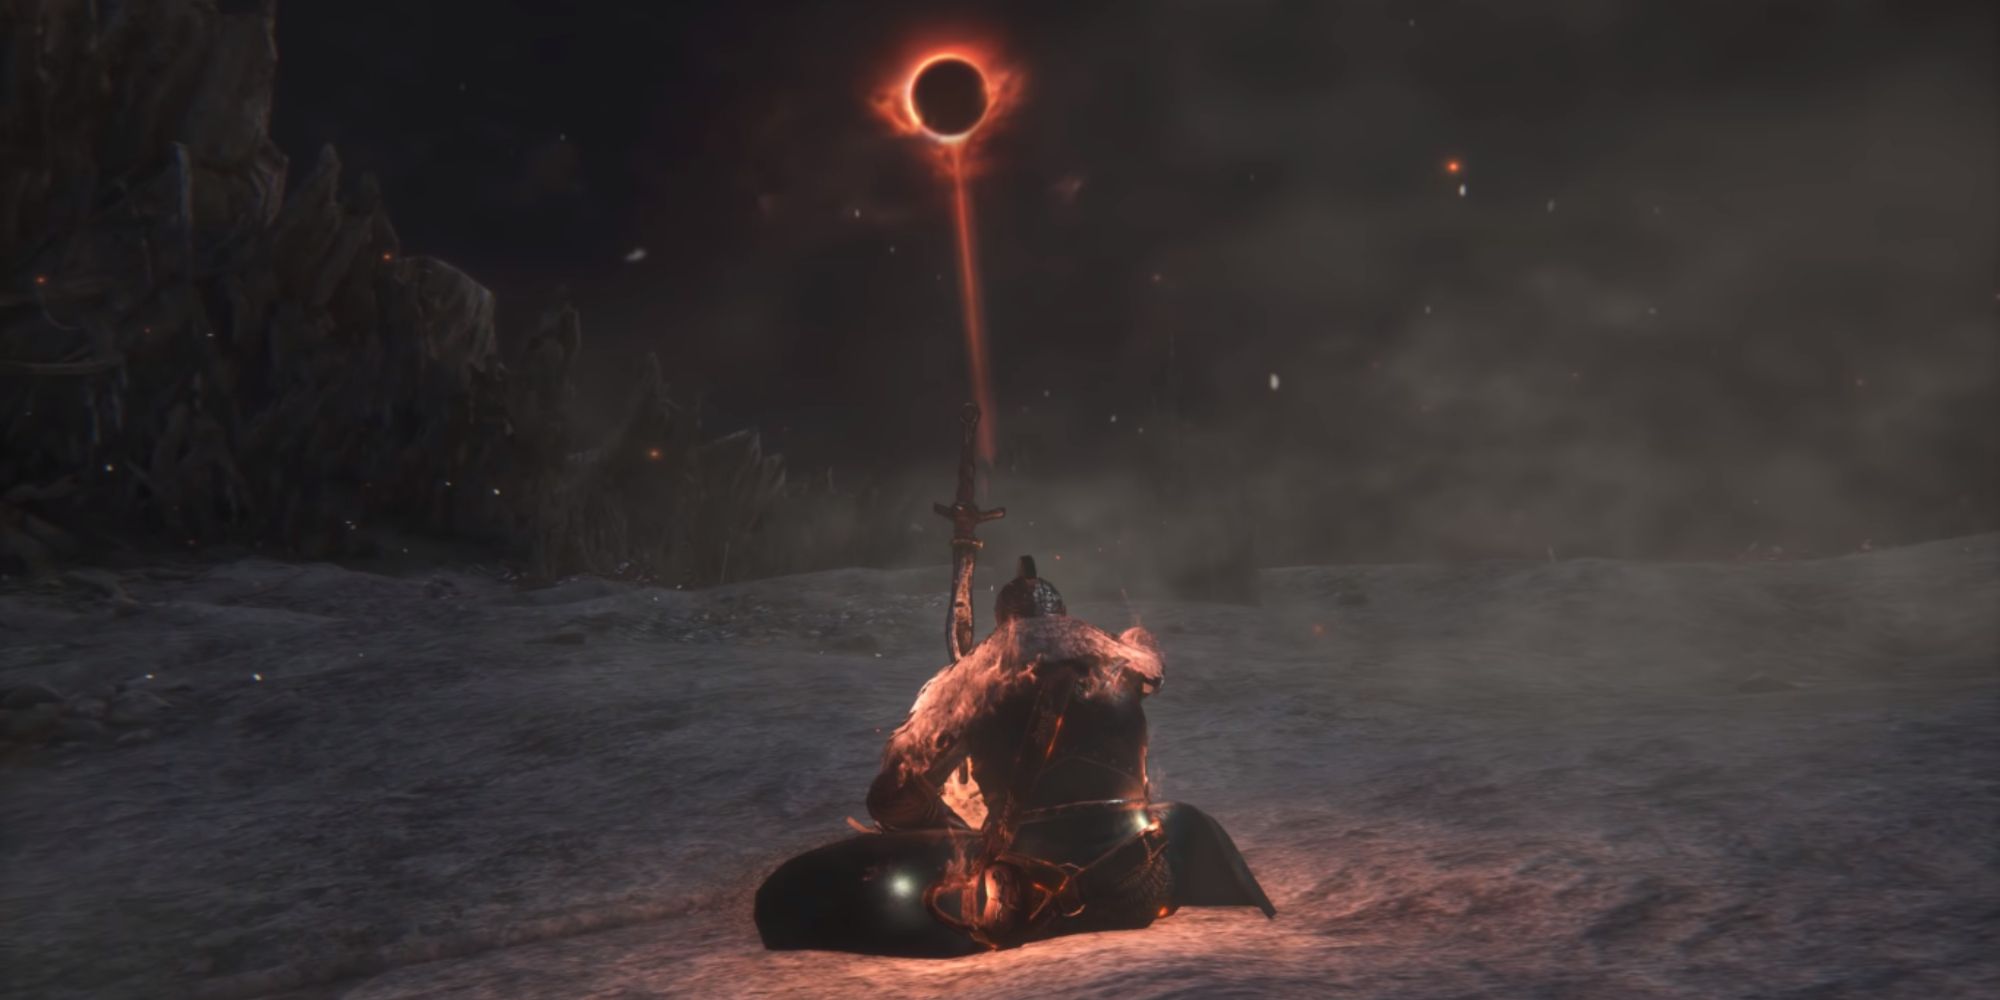 The player sitting on the bonfire.